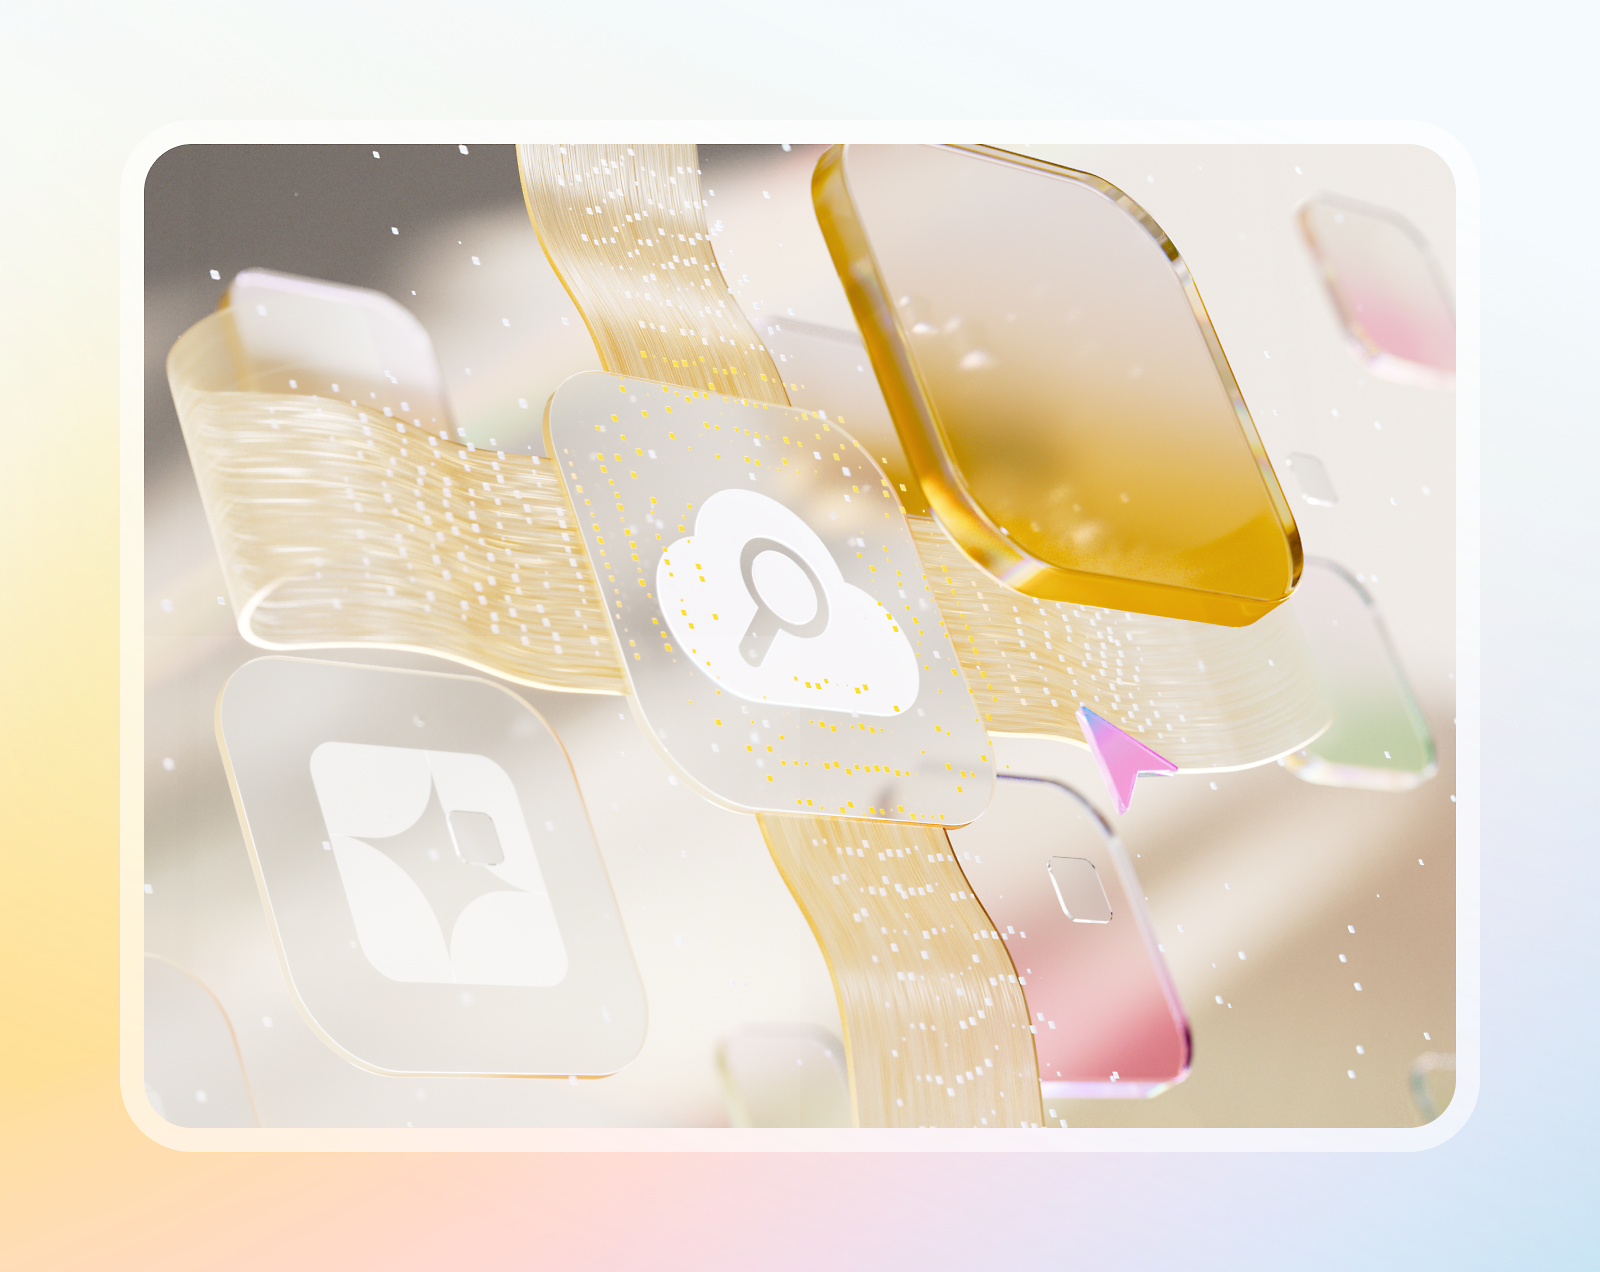 A stylized digital illustration with various app icons, including a magnifying glass, connected by golden streams.